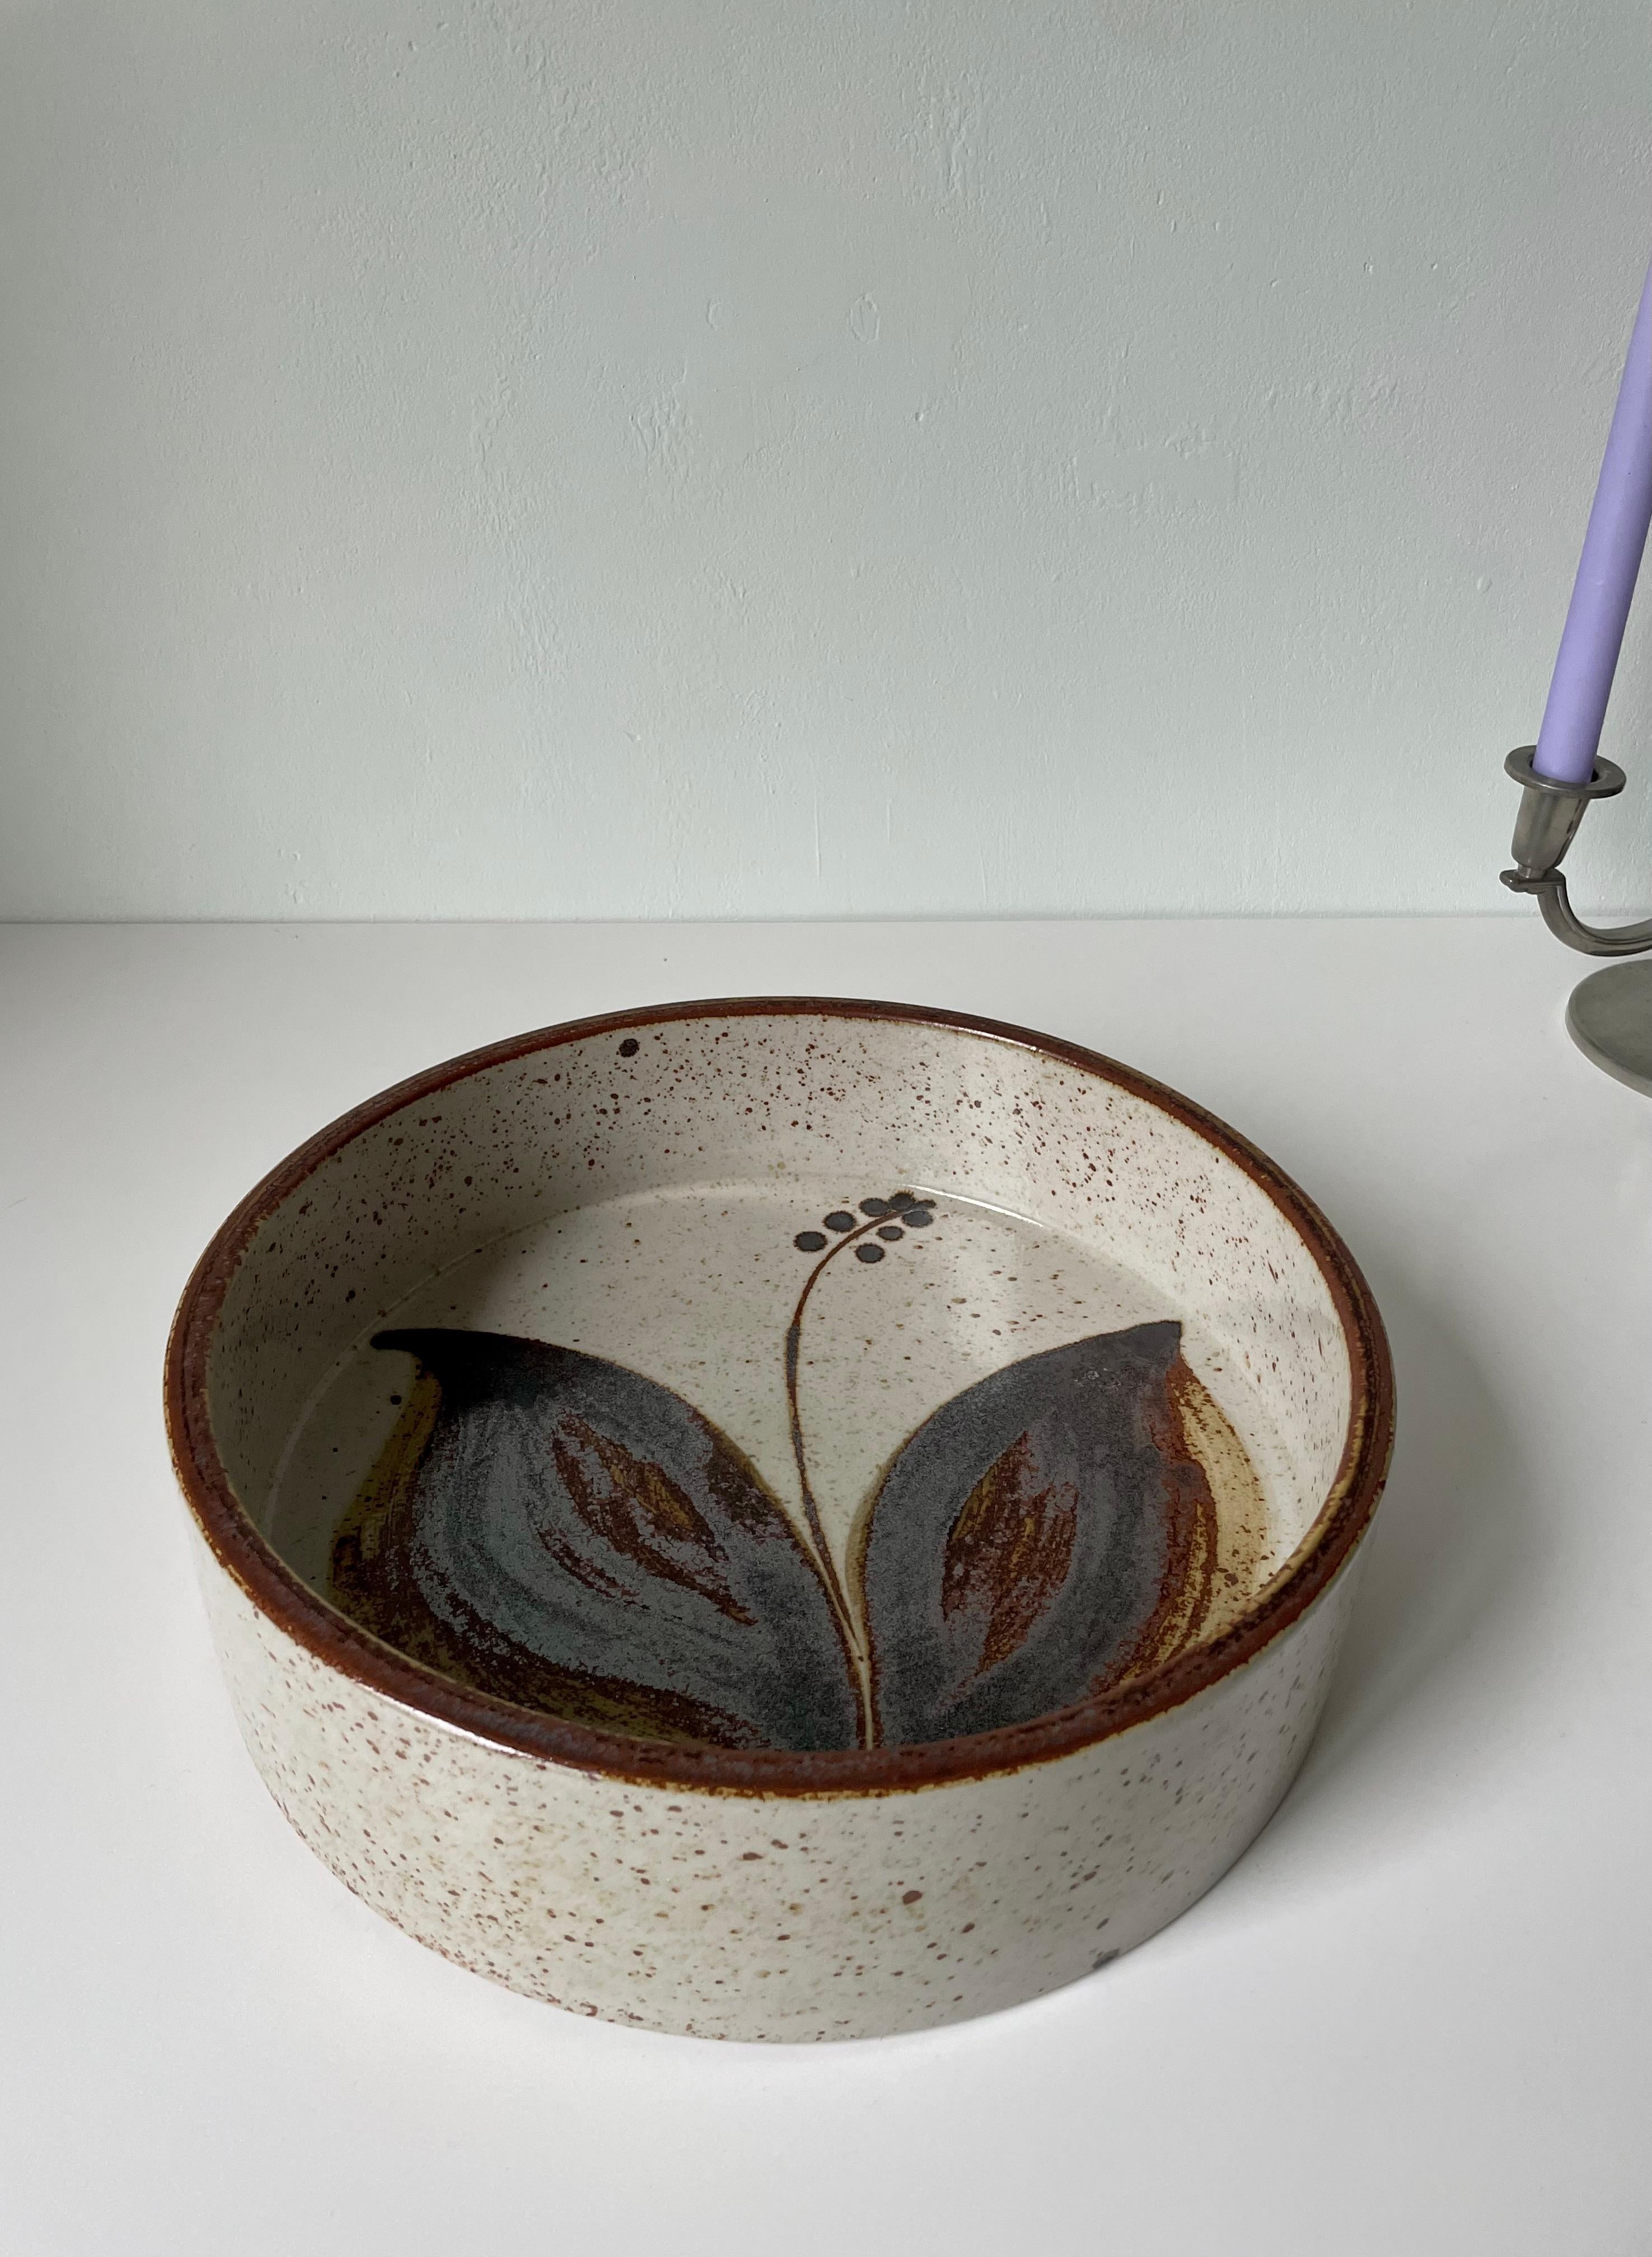 Large hand-thrown Scandinavian Modern stoneware centerpiece bowl in light gray glaze with large earth colored stylized floral decor with large leaves in the center. Simple lines with tall straight edges lined with a warm brown color. Made for Søholm